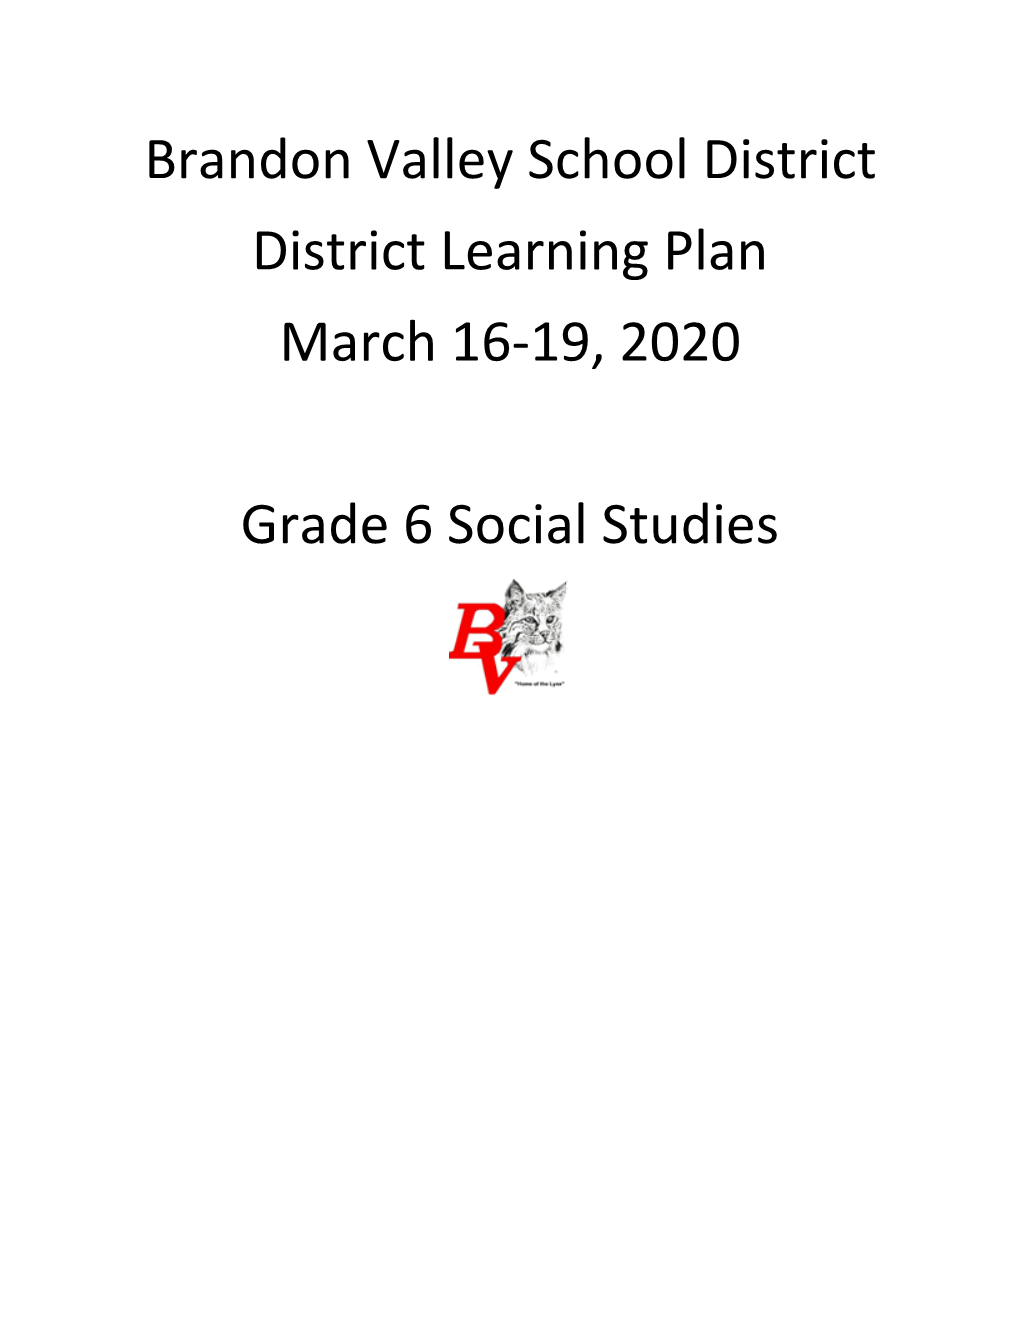 Brandon Valley School District District Learning Plan March 16-19, 2020